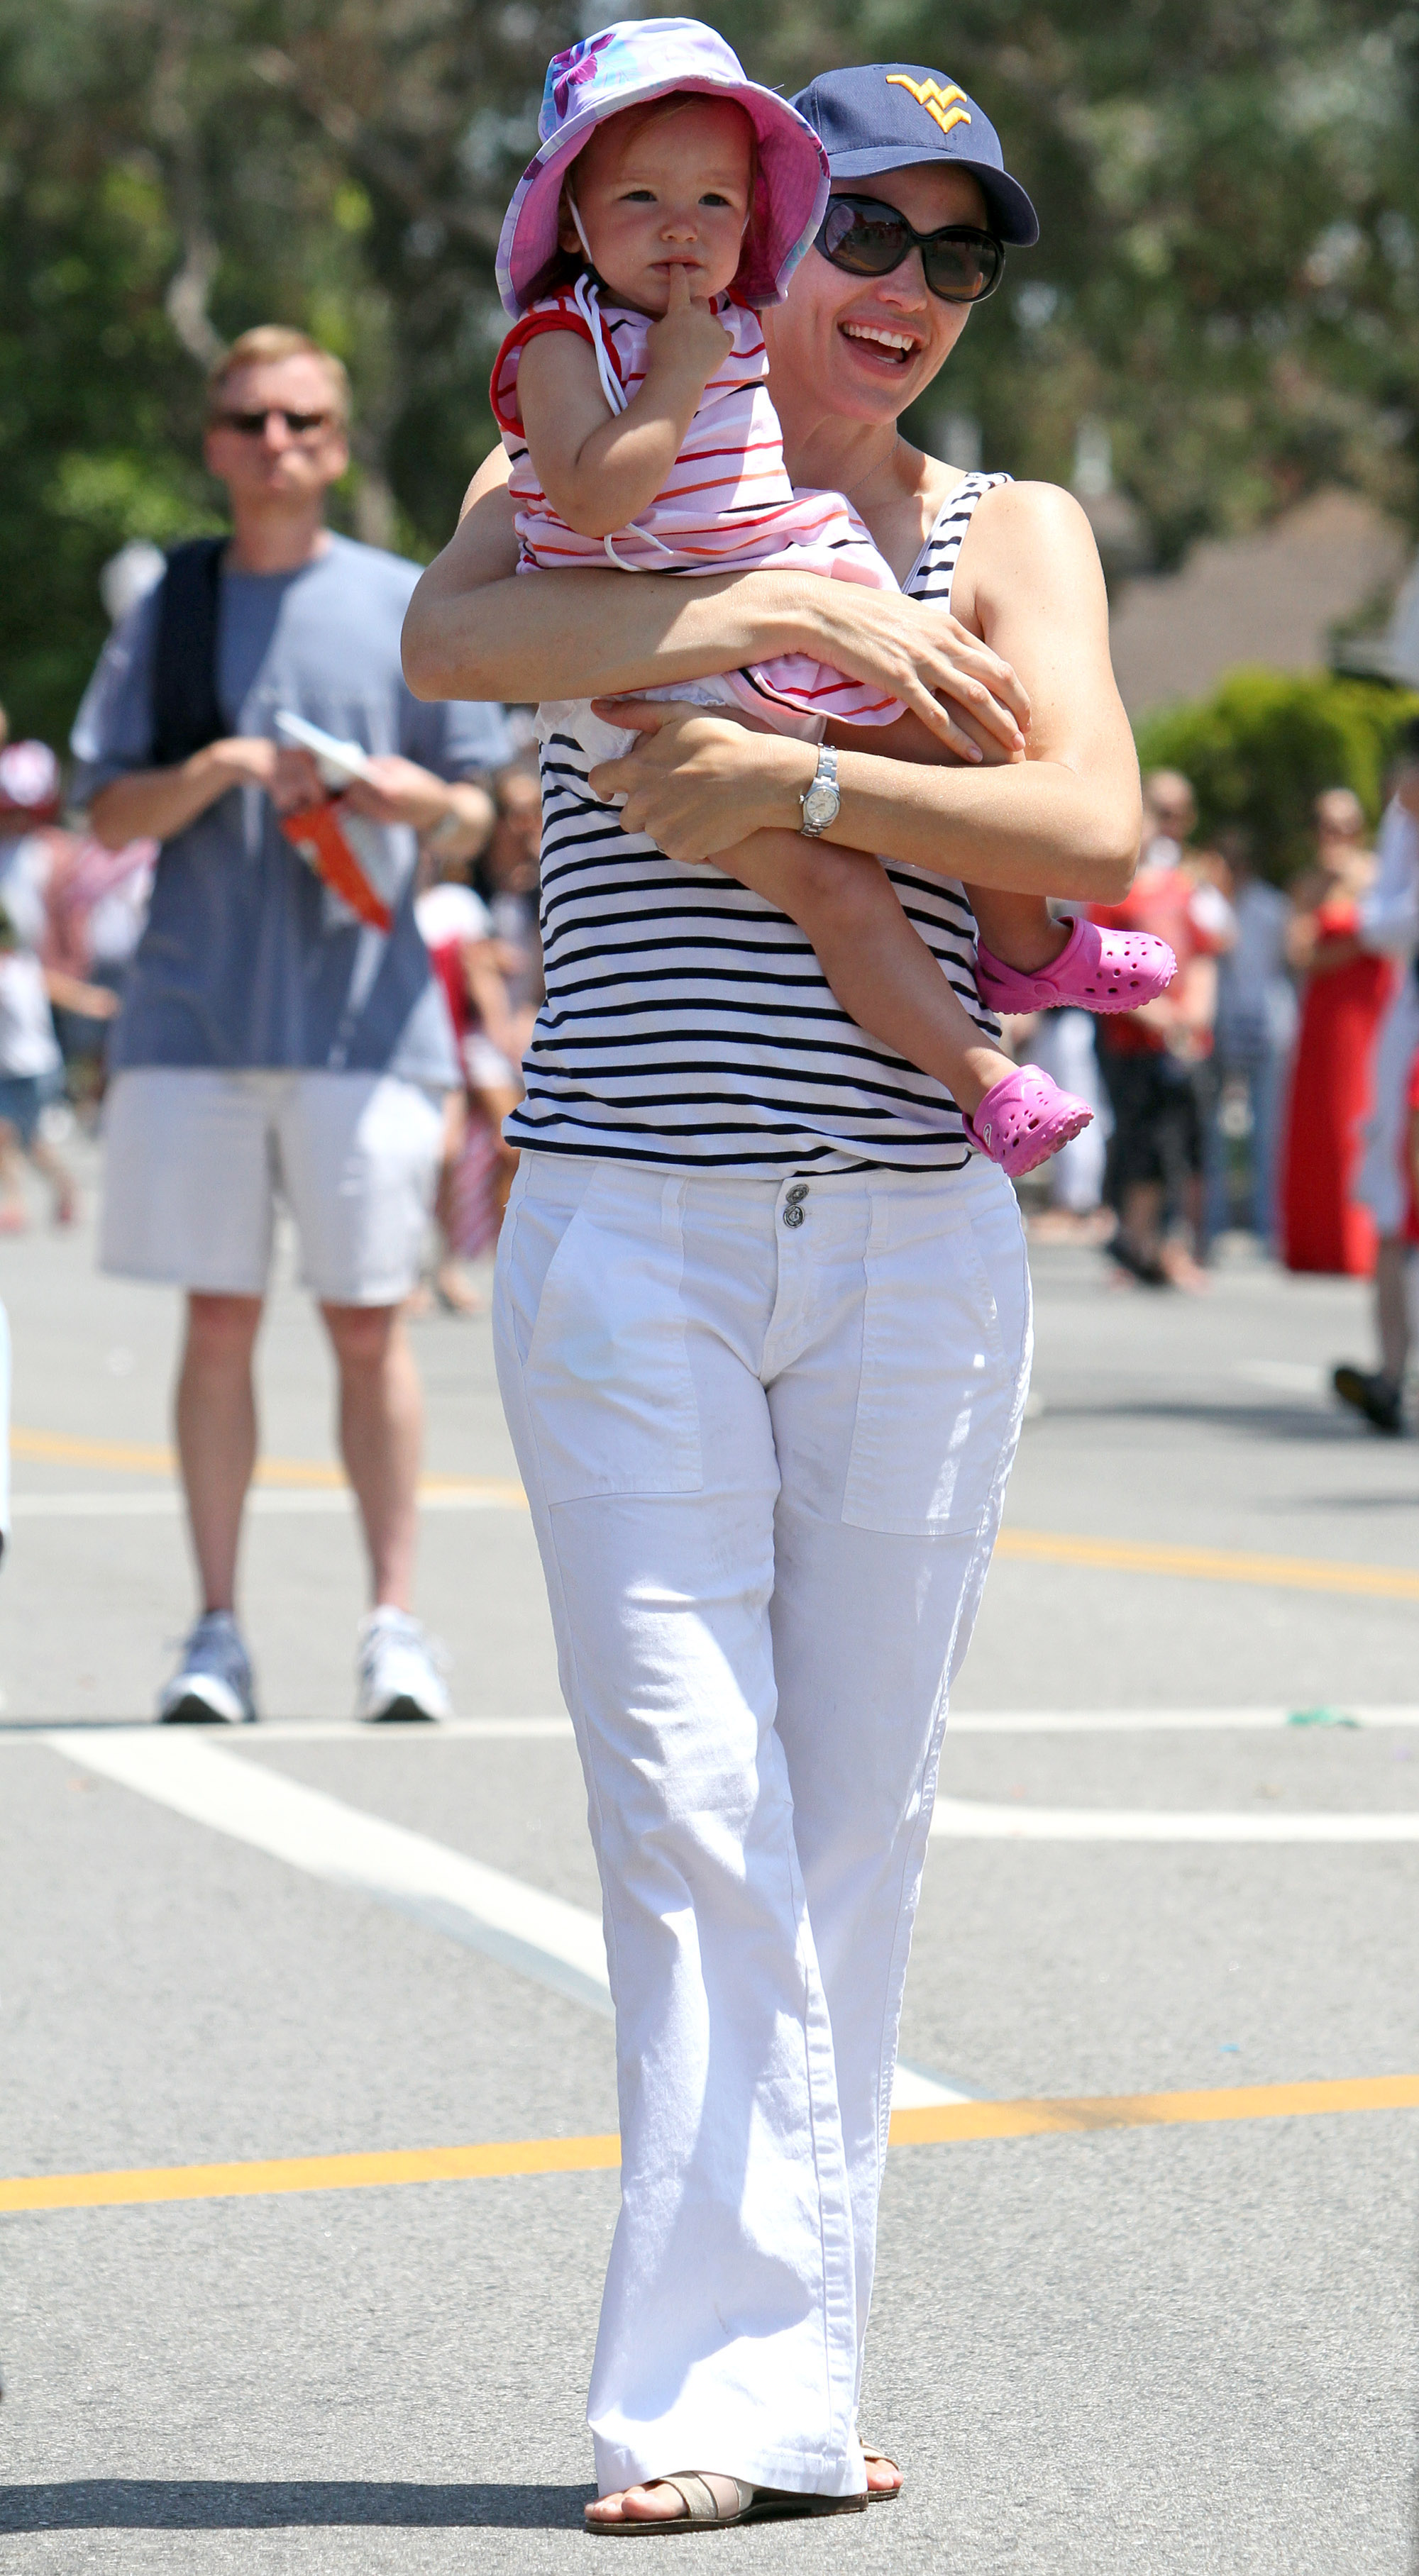 Jennifer Garner and Seraphina Affleck attend the 4th July Parade in Pacific Palisades on July 4, 2010 in Los Angeles, California. | Source: Getty Images